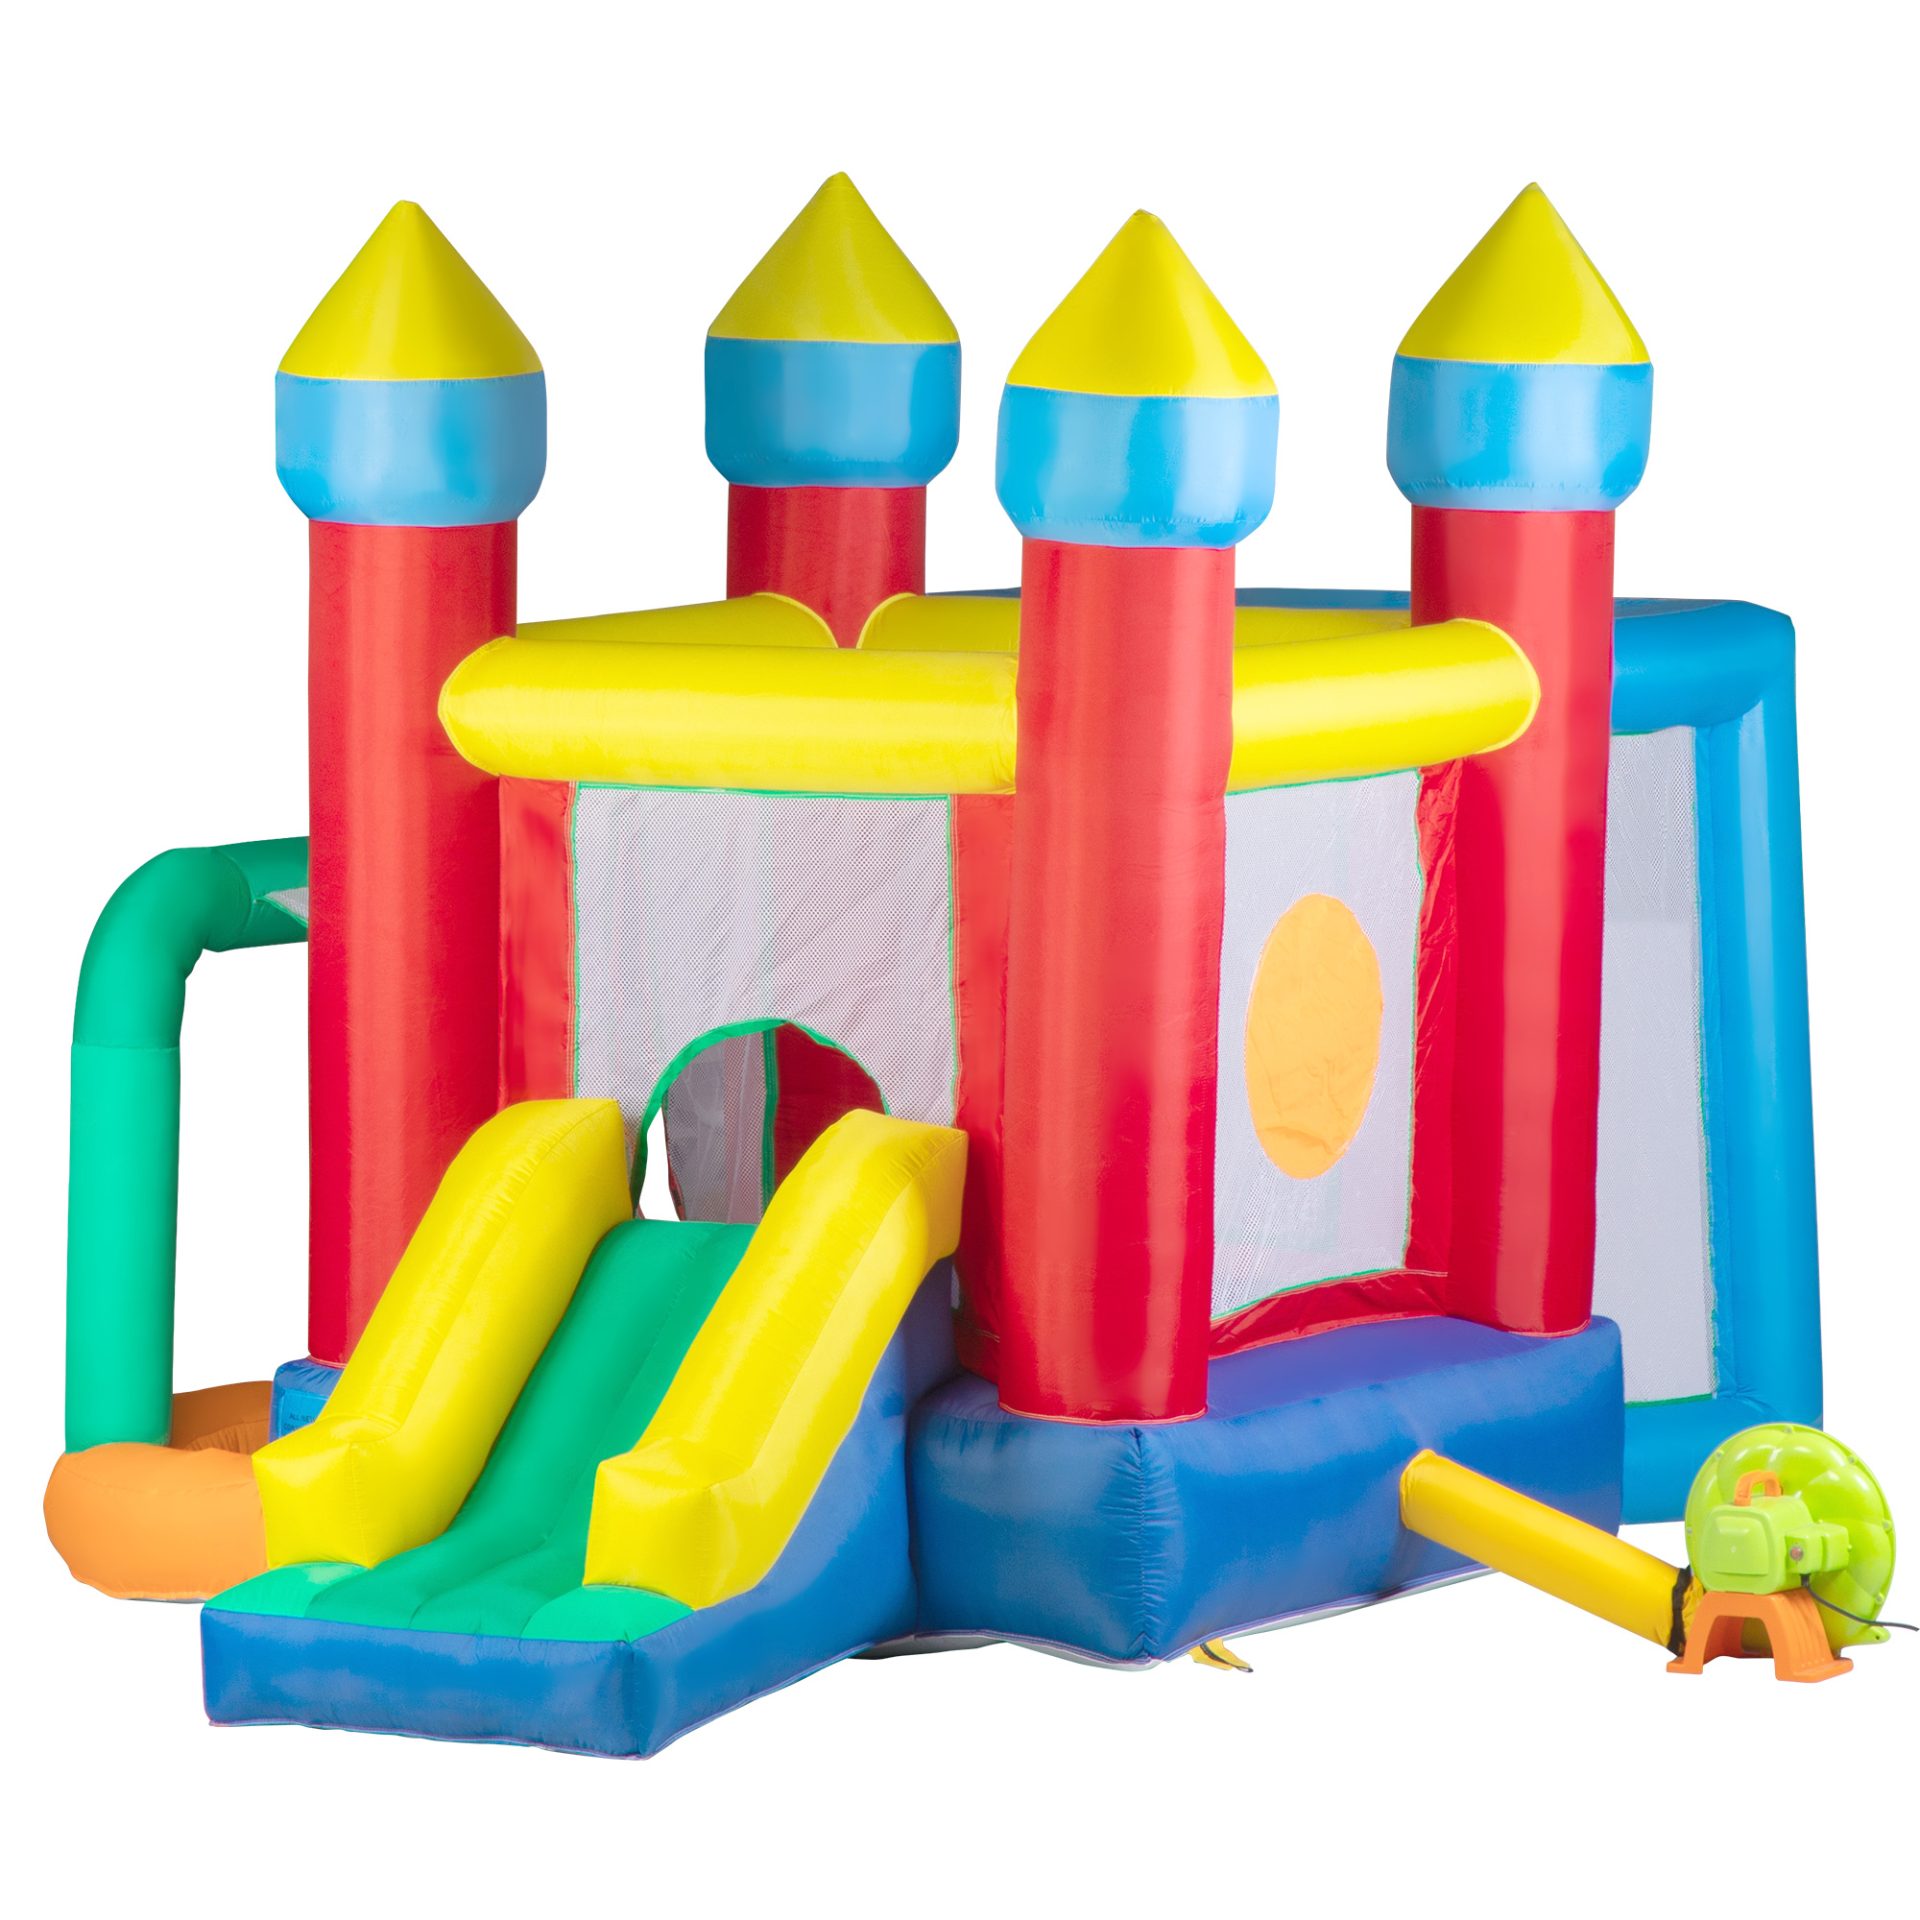 Nyeekoy Inflatable Bounce House Castle Bouncer, Indoor and Outdoor Playset for Toddlers with Carry Bag, Repair Kit TH17H08823